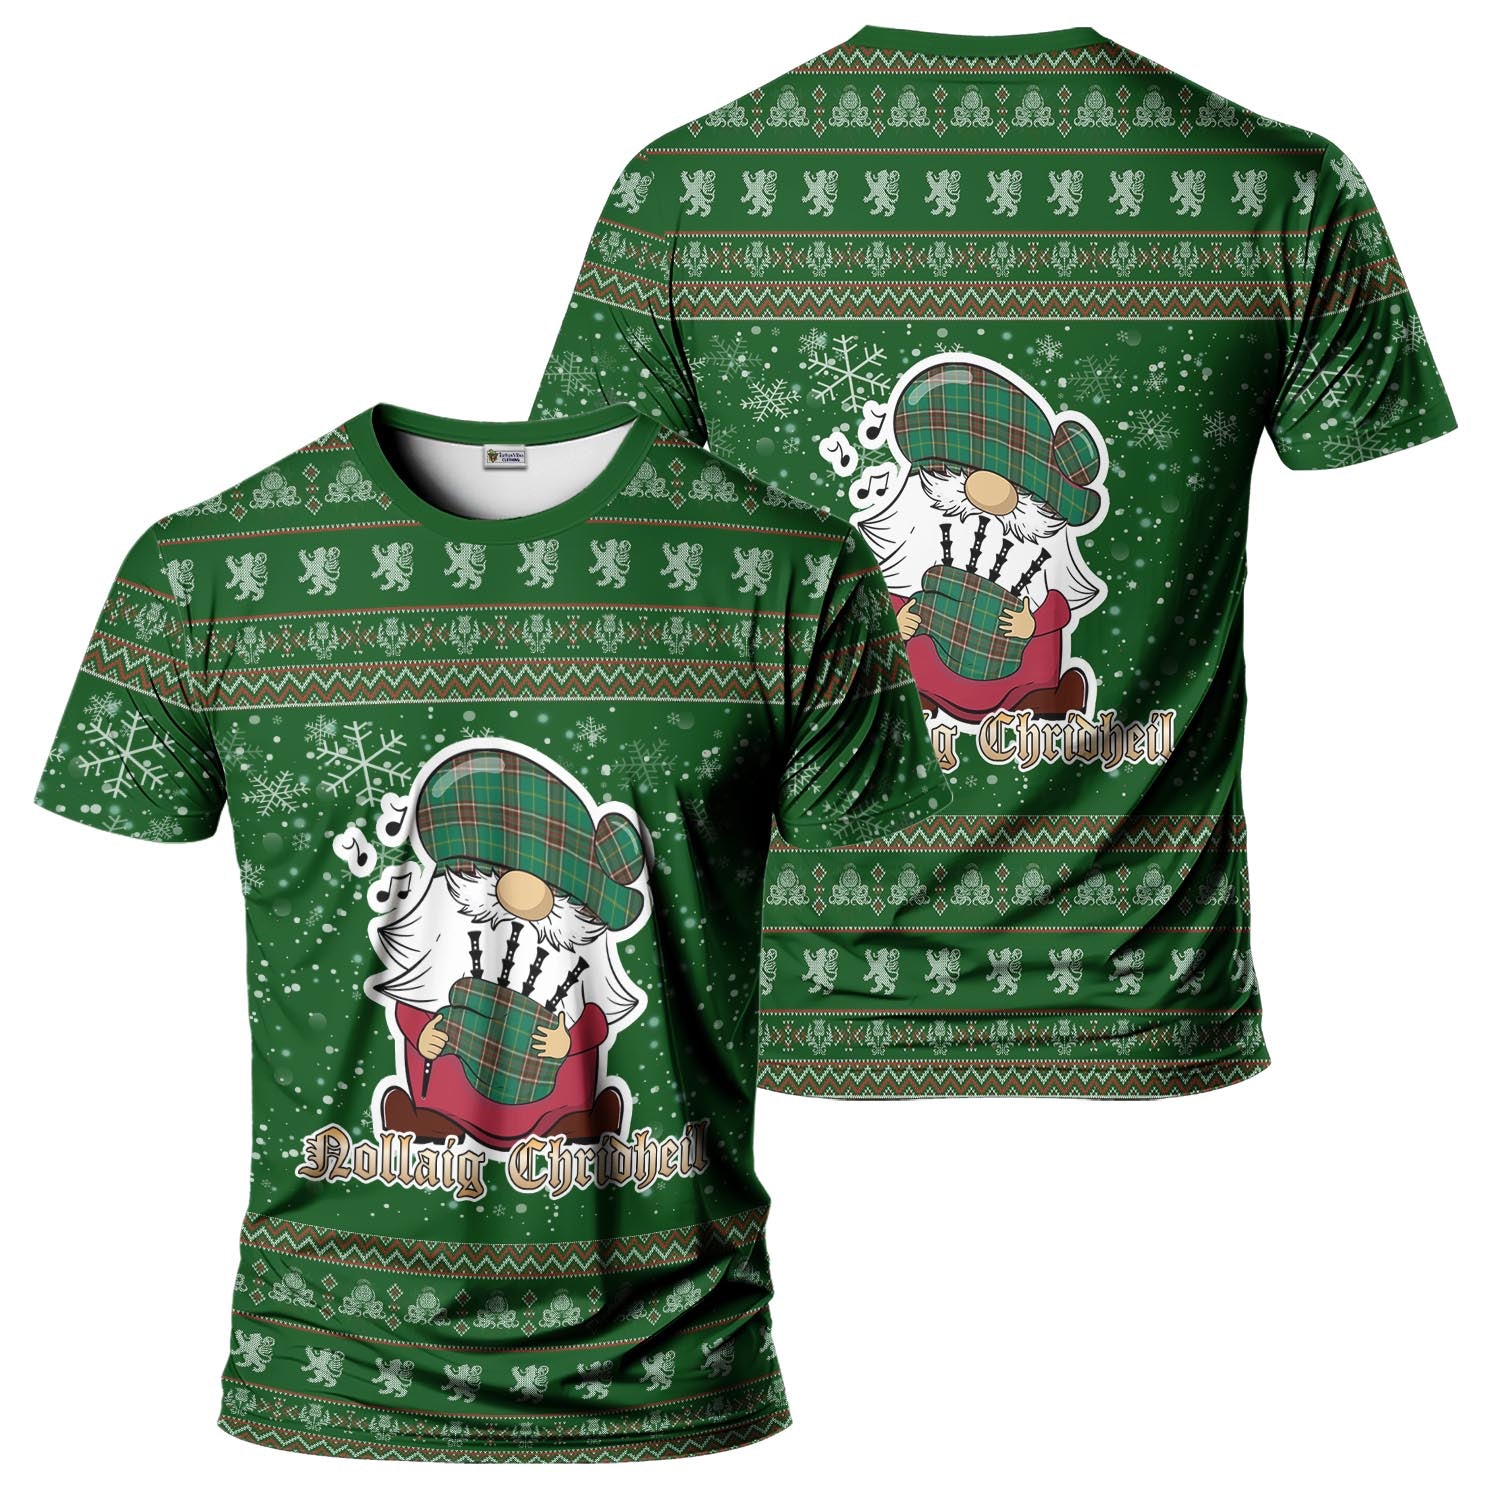 Newfoundland And Labrador Province Canada Clan Christmas Family T-Shirt with Funny Gnome Playing Bagpipes Men's Shirt Green - Tartanvibesclothing